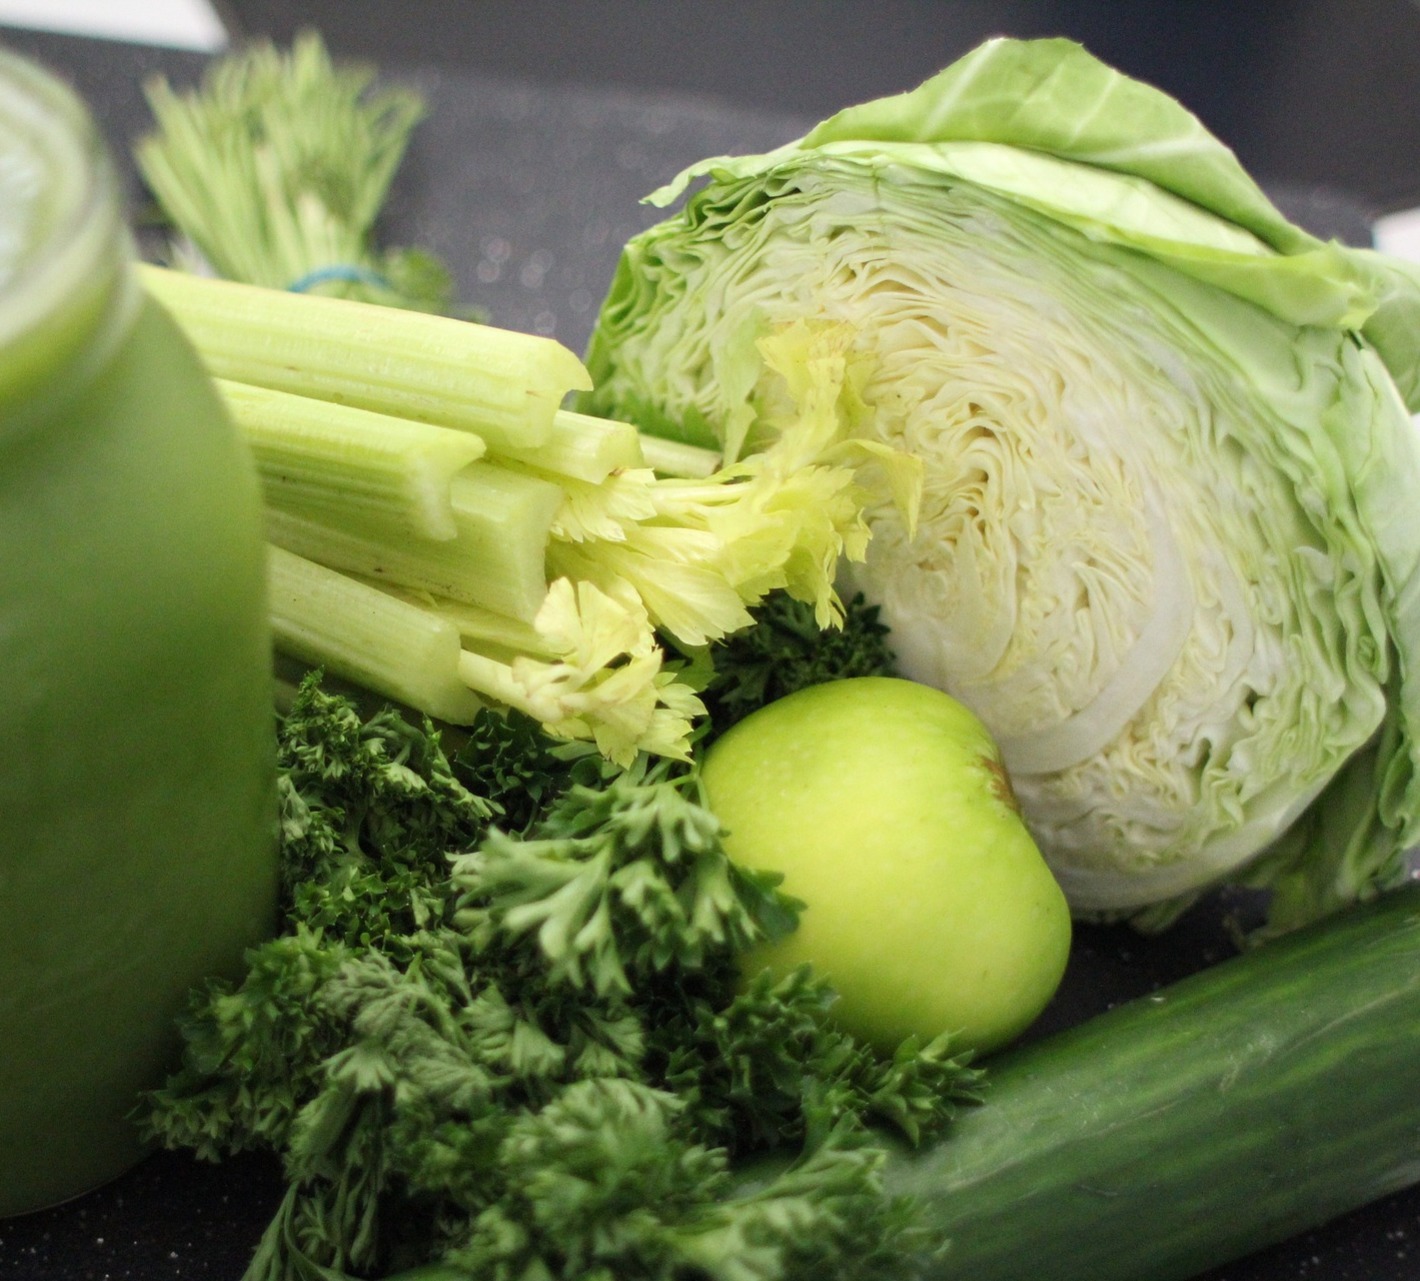 As assortment of green vegetables, including celery, which is one of the 14 common food allergens, which our no win no fee allergy solicitors can assist with a claim for.